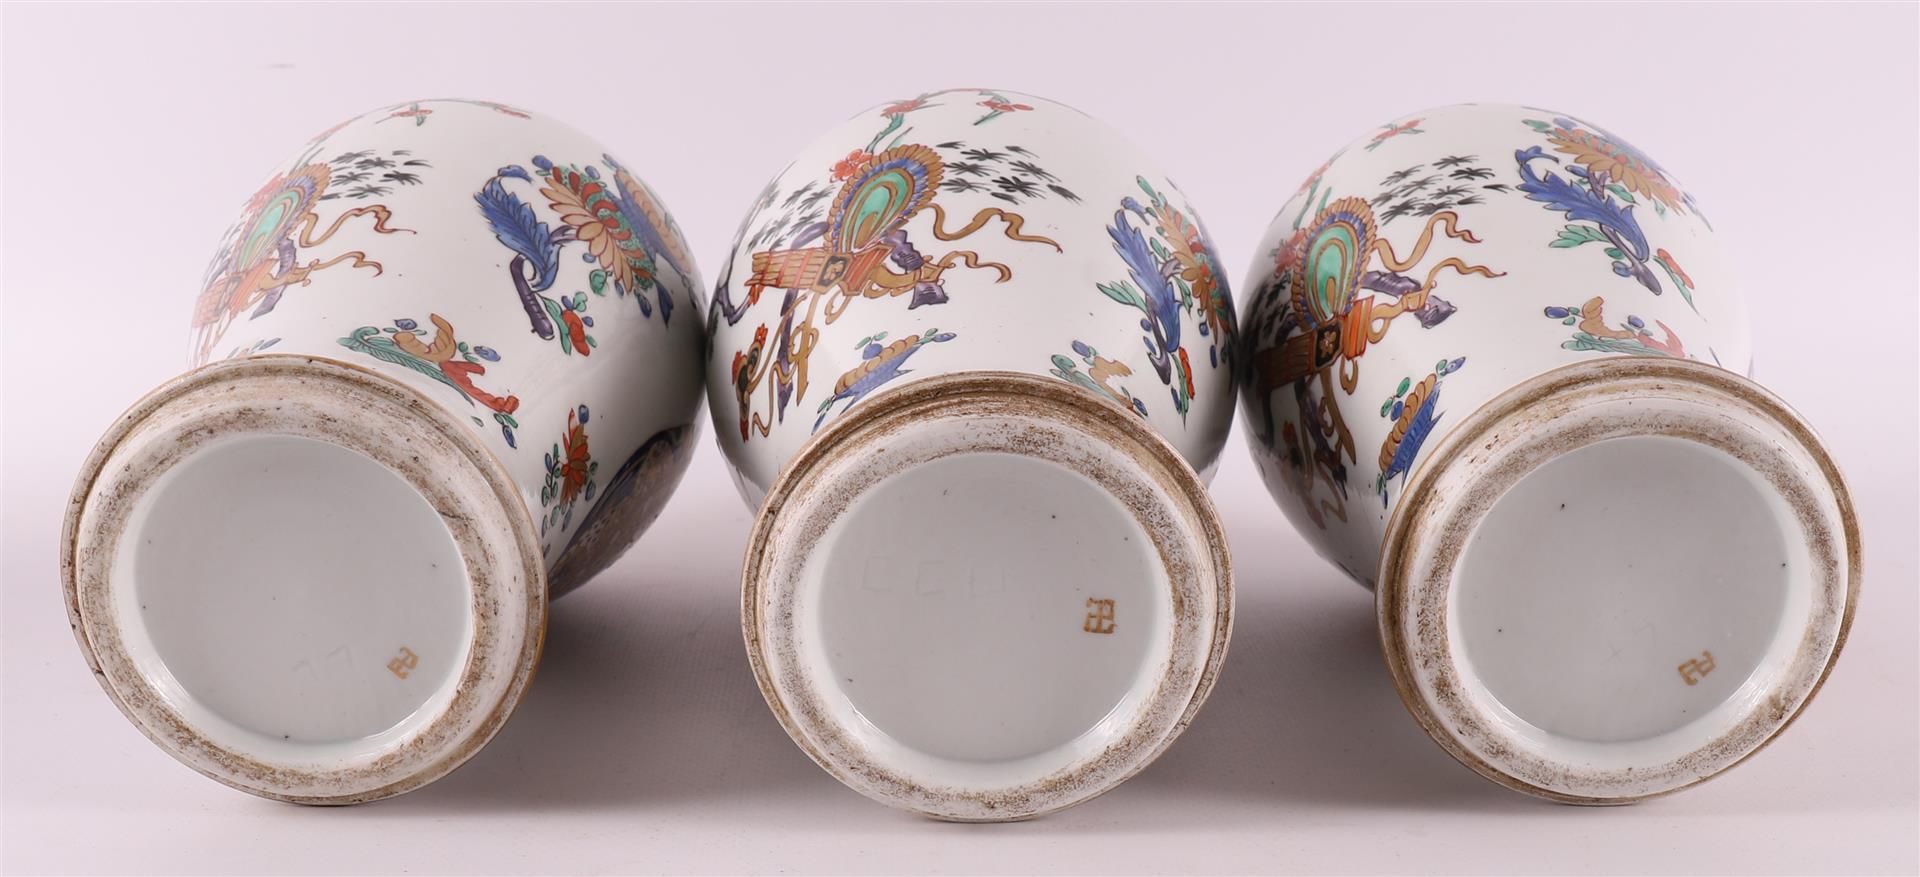 A five-piece export porcelain Chinose cabinet set, France, Samson, 19th century. - Image 6 of 10